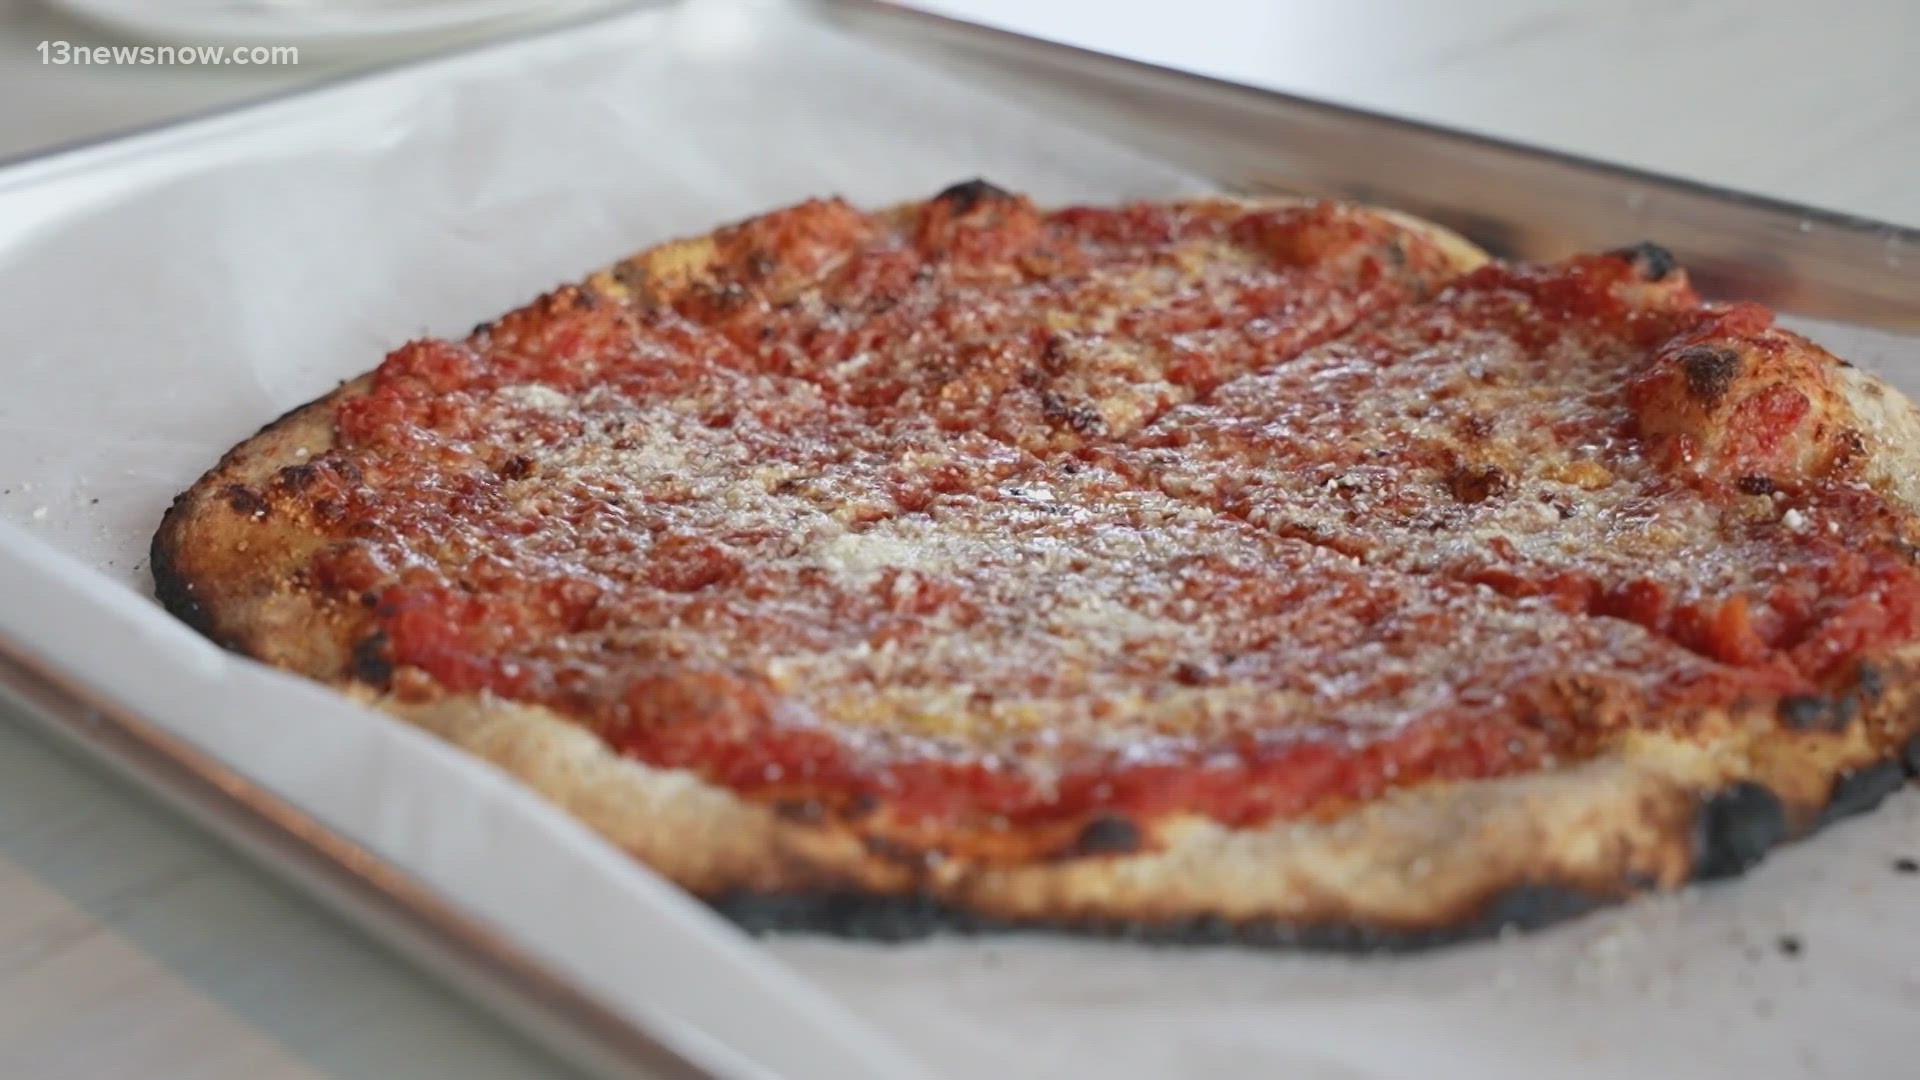 New Haven-style pizza is now served in Norfolk at District Apizza. The crust is really where you can tell the difference.